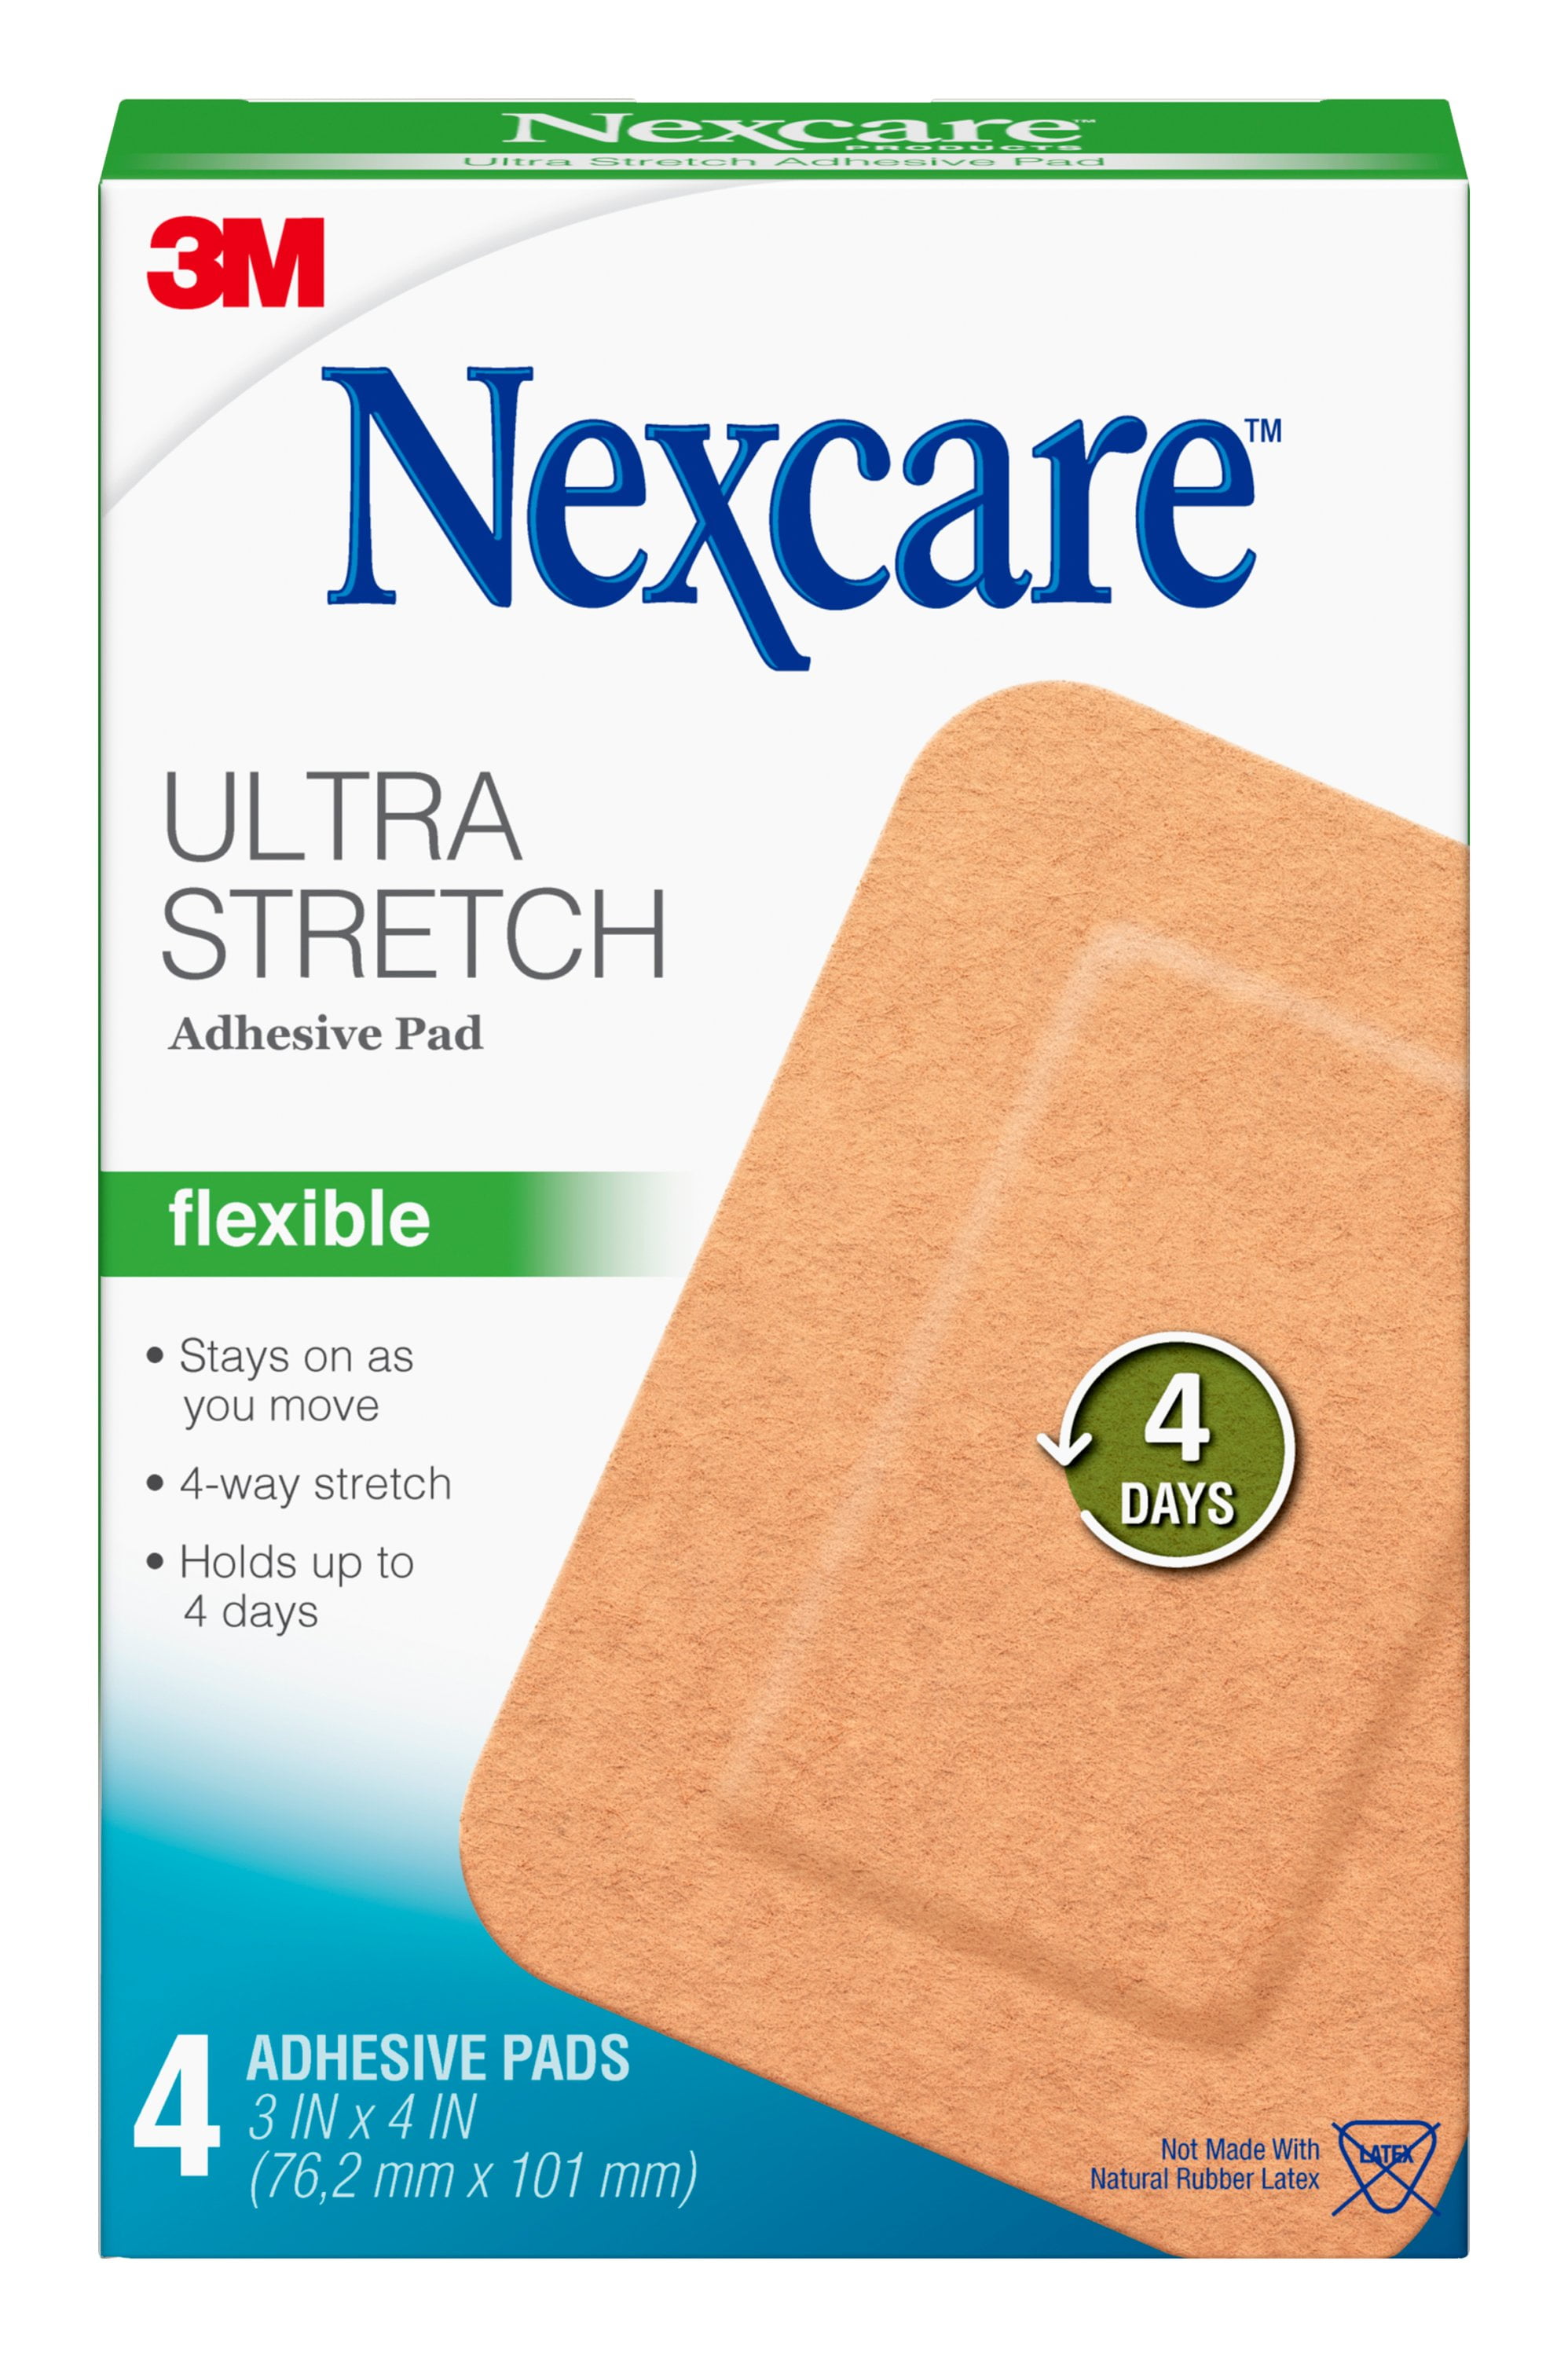 Nexcare Ultra Stretch Adhesive Pad, 3 in x 4 in